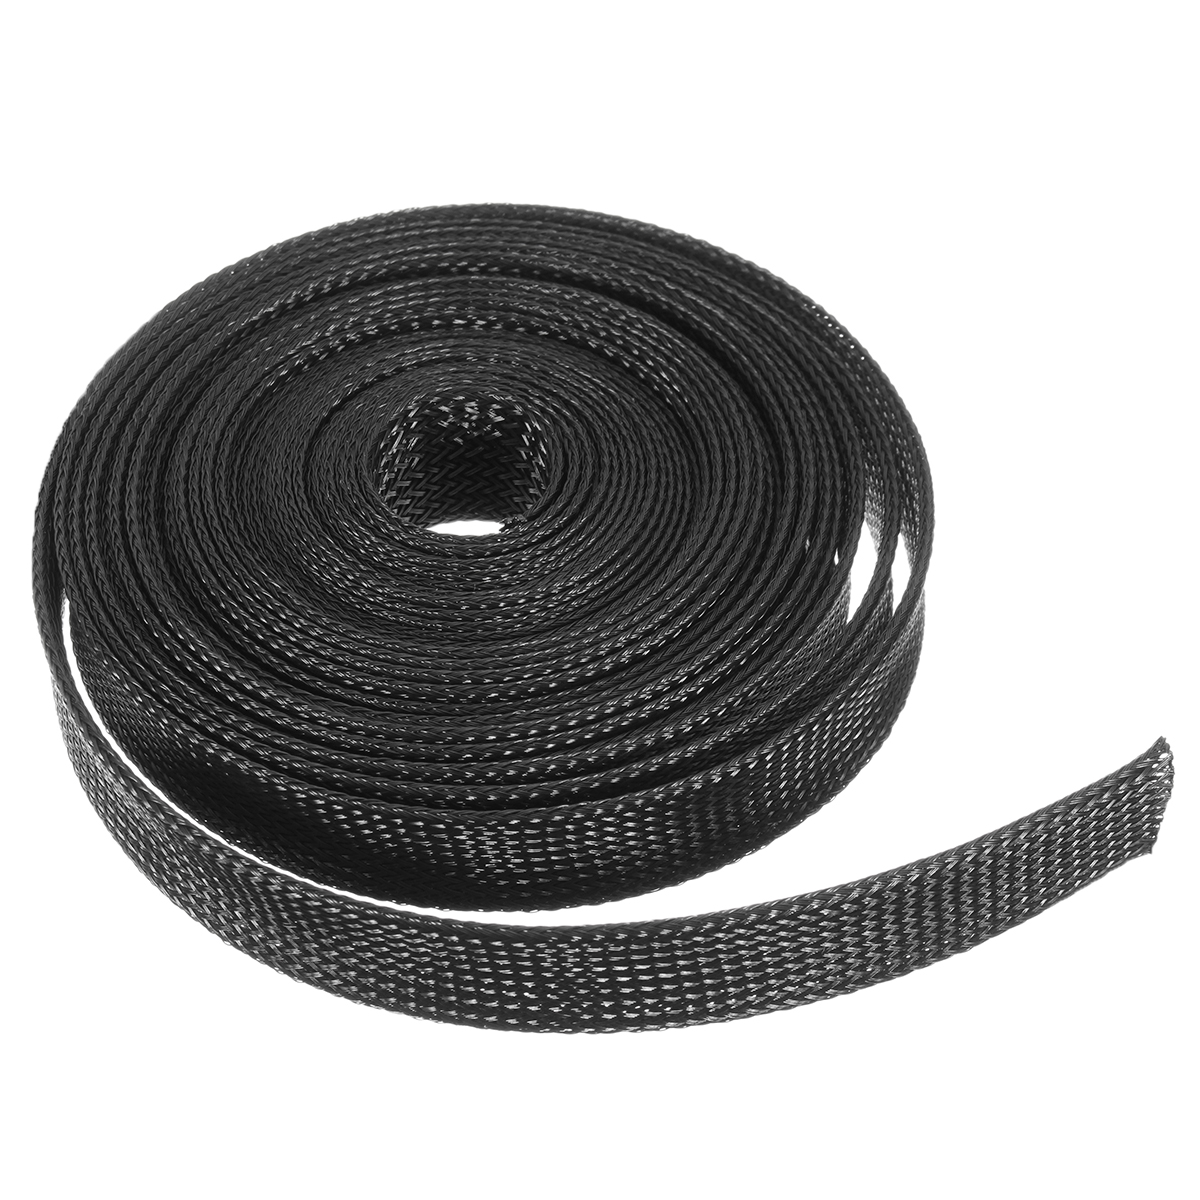 6m-8mm10mm12mm15mm20mm-Wire-Cable-Sheathing-Expandable-Sleeving-Braided-Loom-Tubing-Black-1179628-5